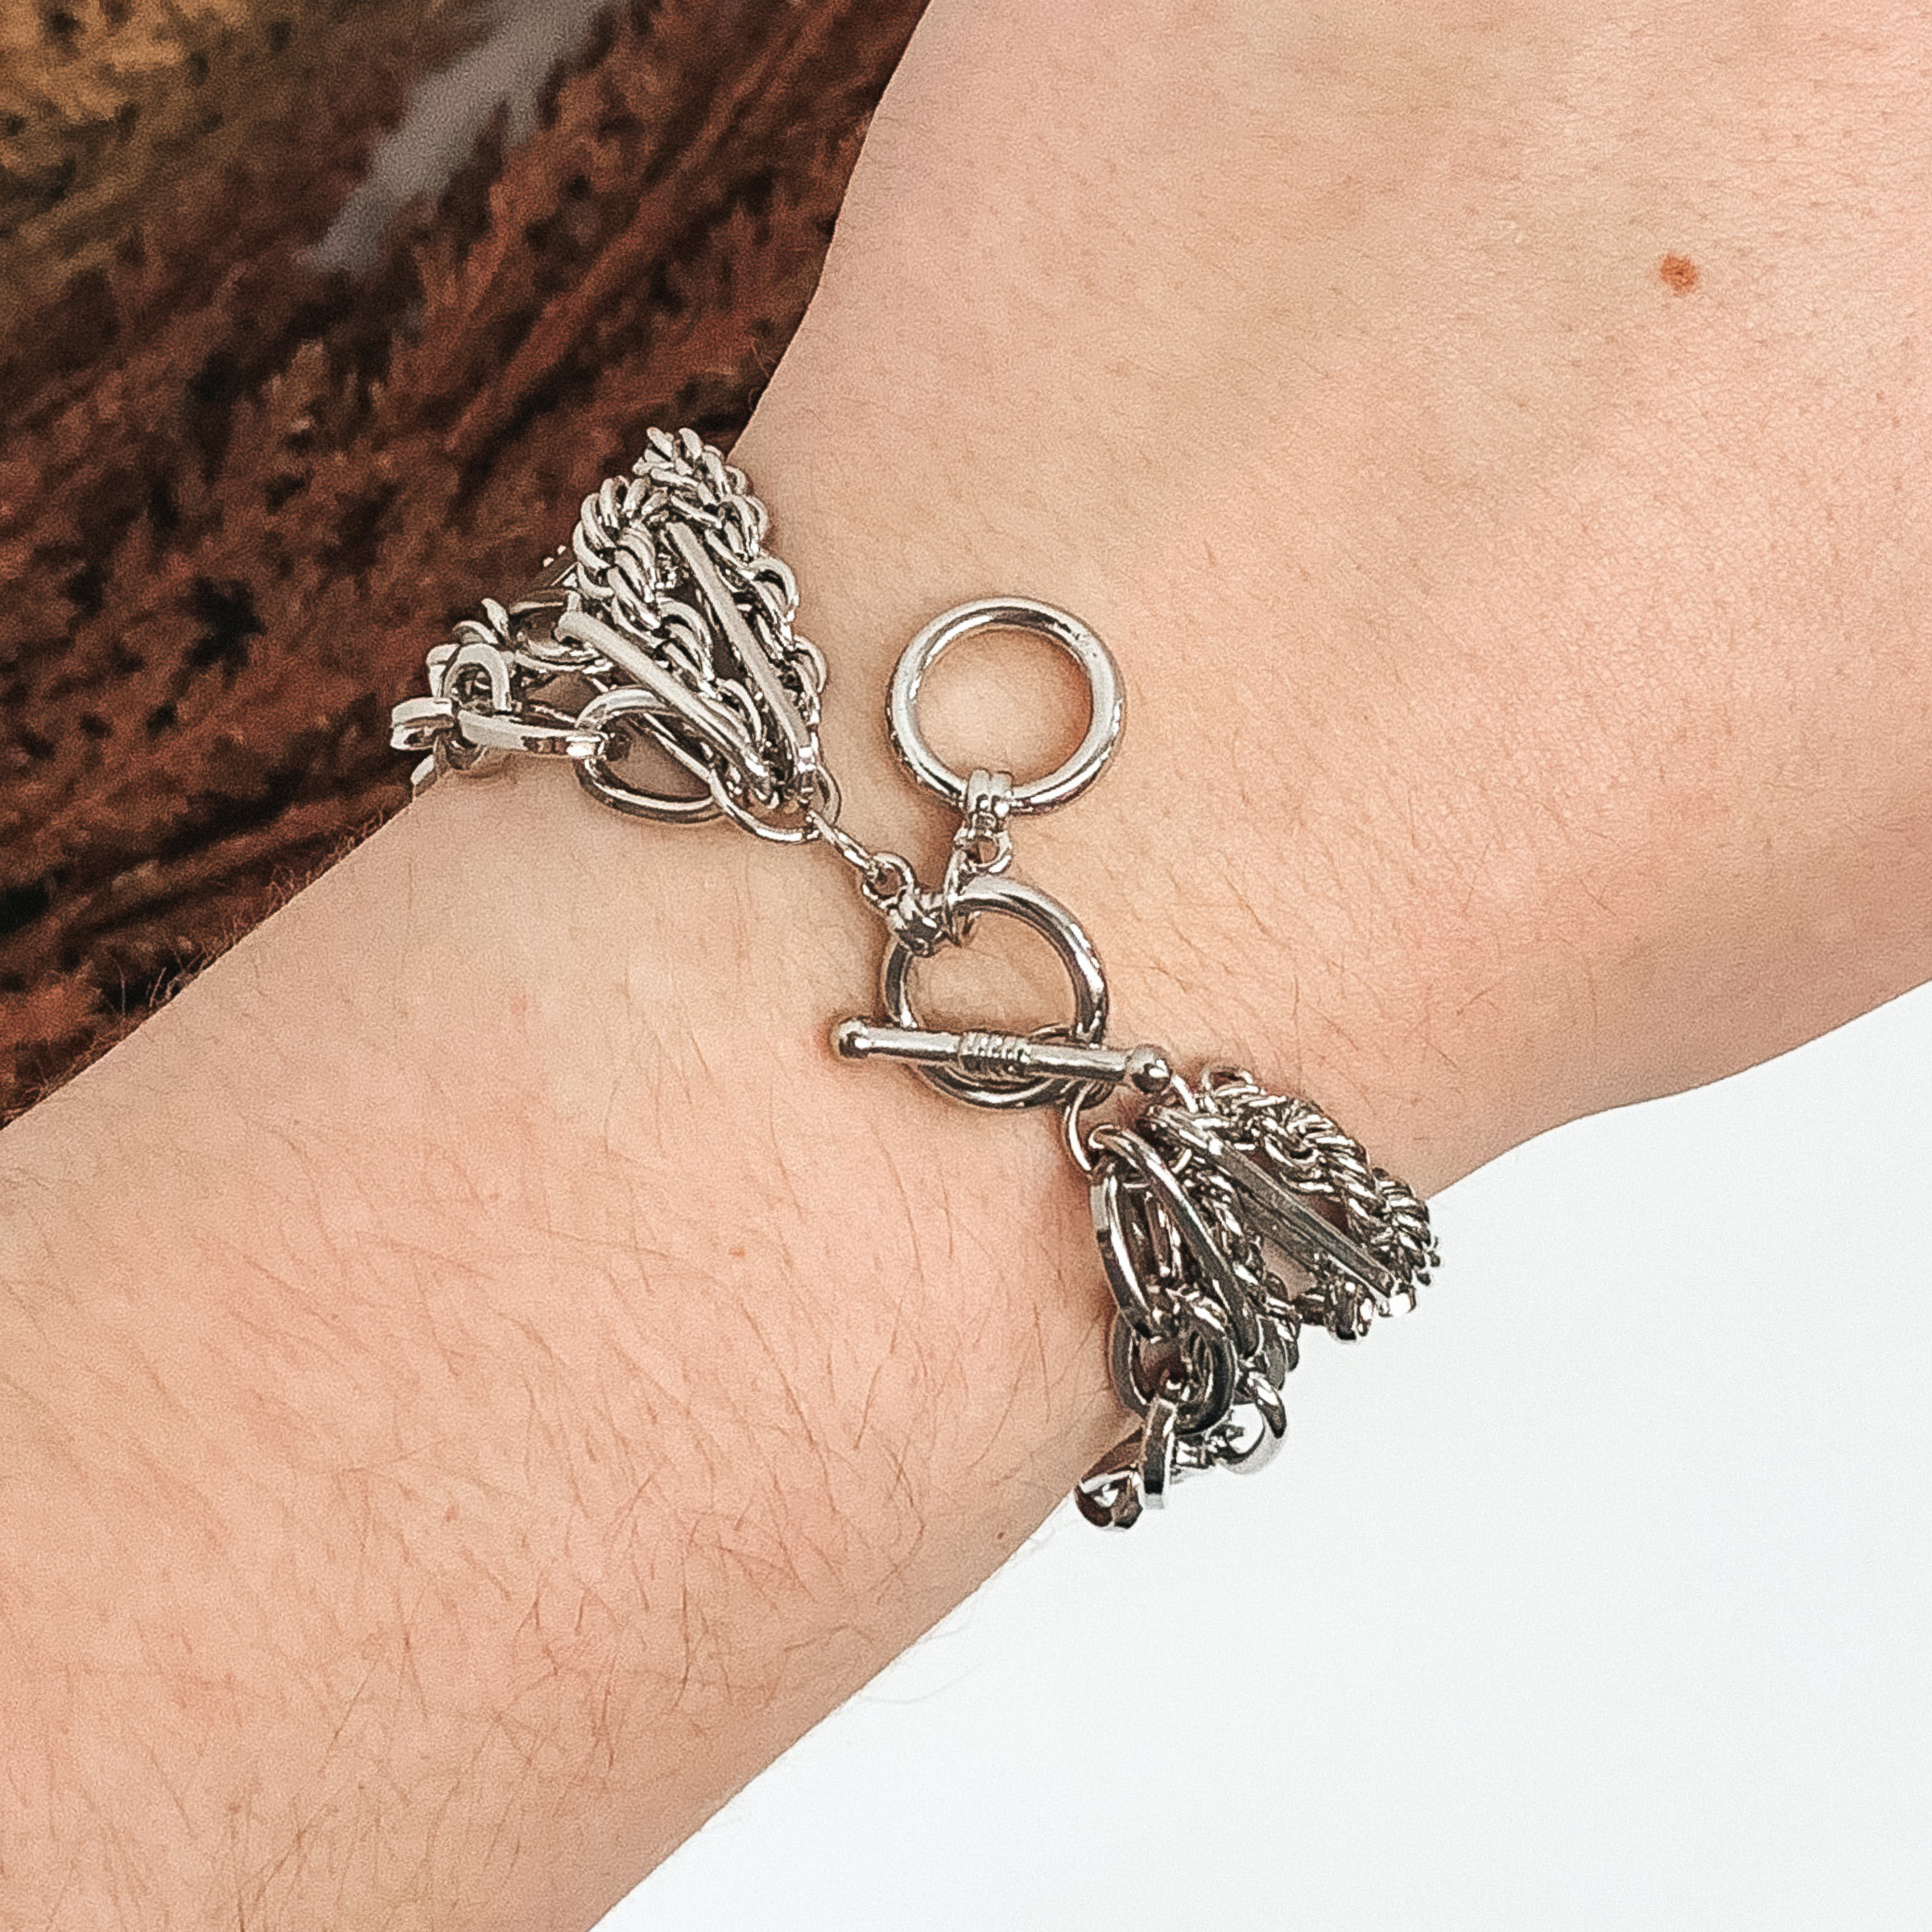 Keep it Real Multi Silver Chain Bracelet - Giddy Up Glamour Boutique